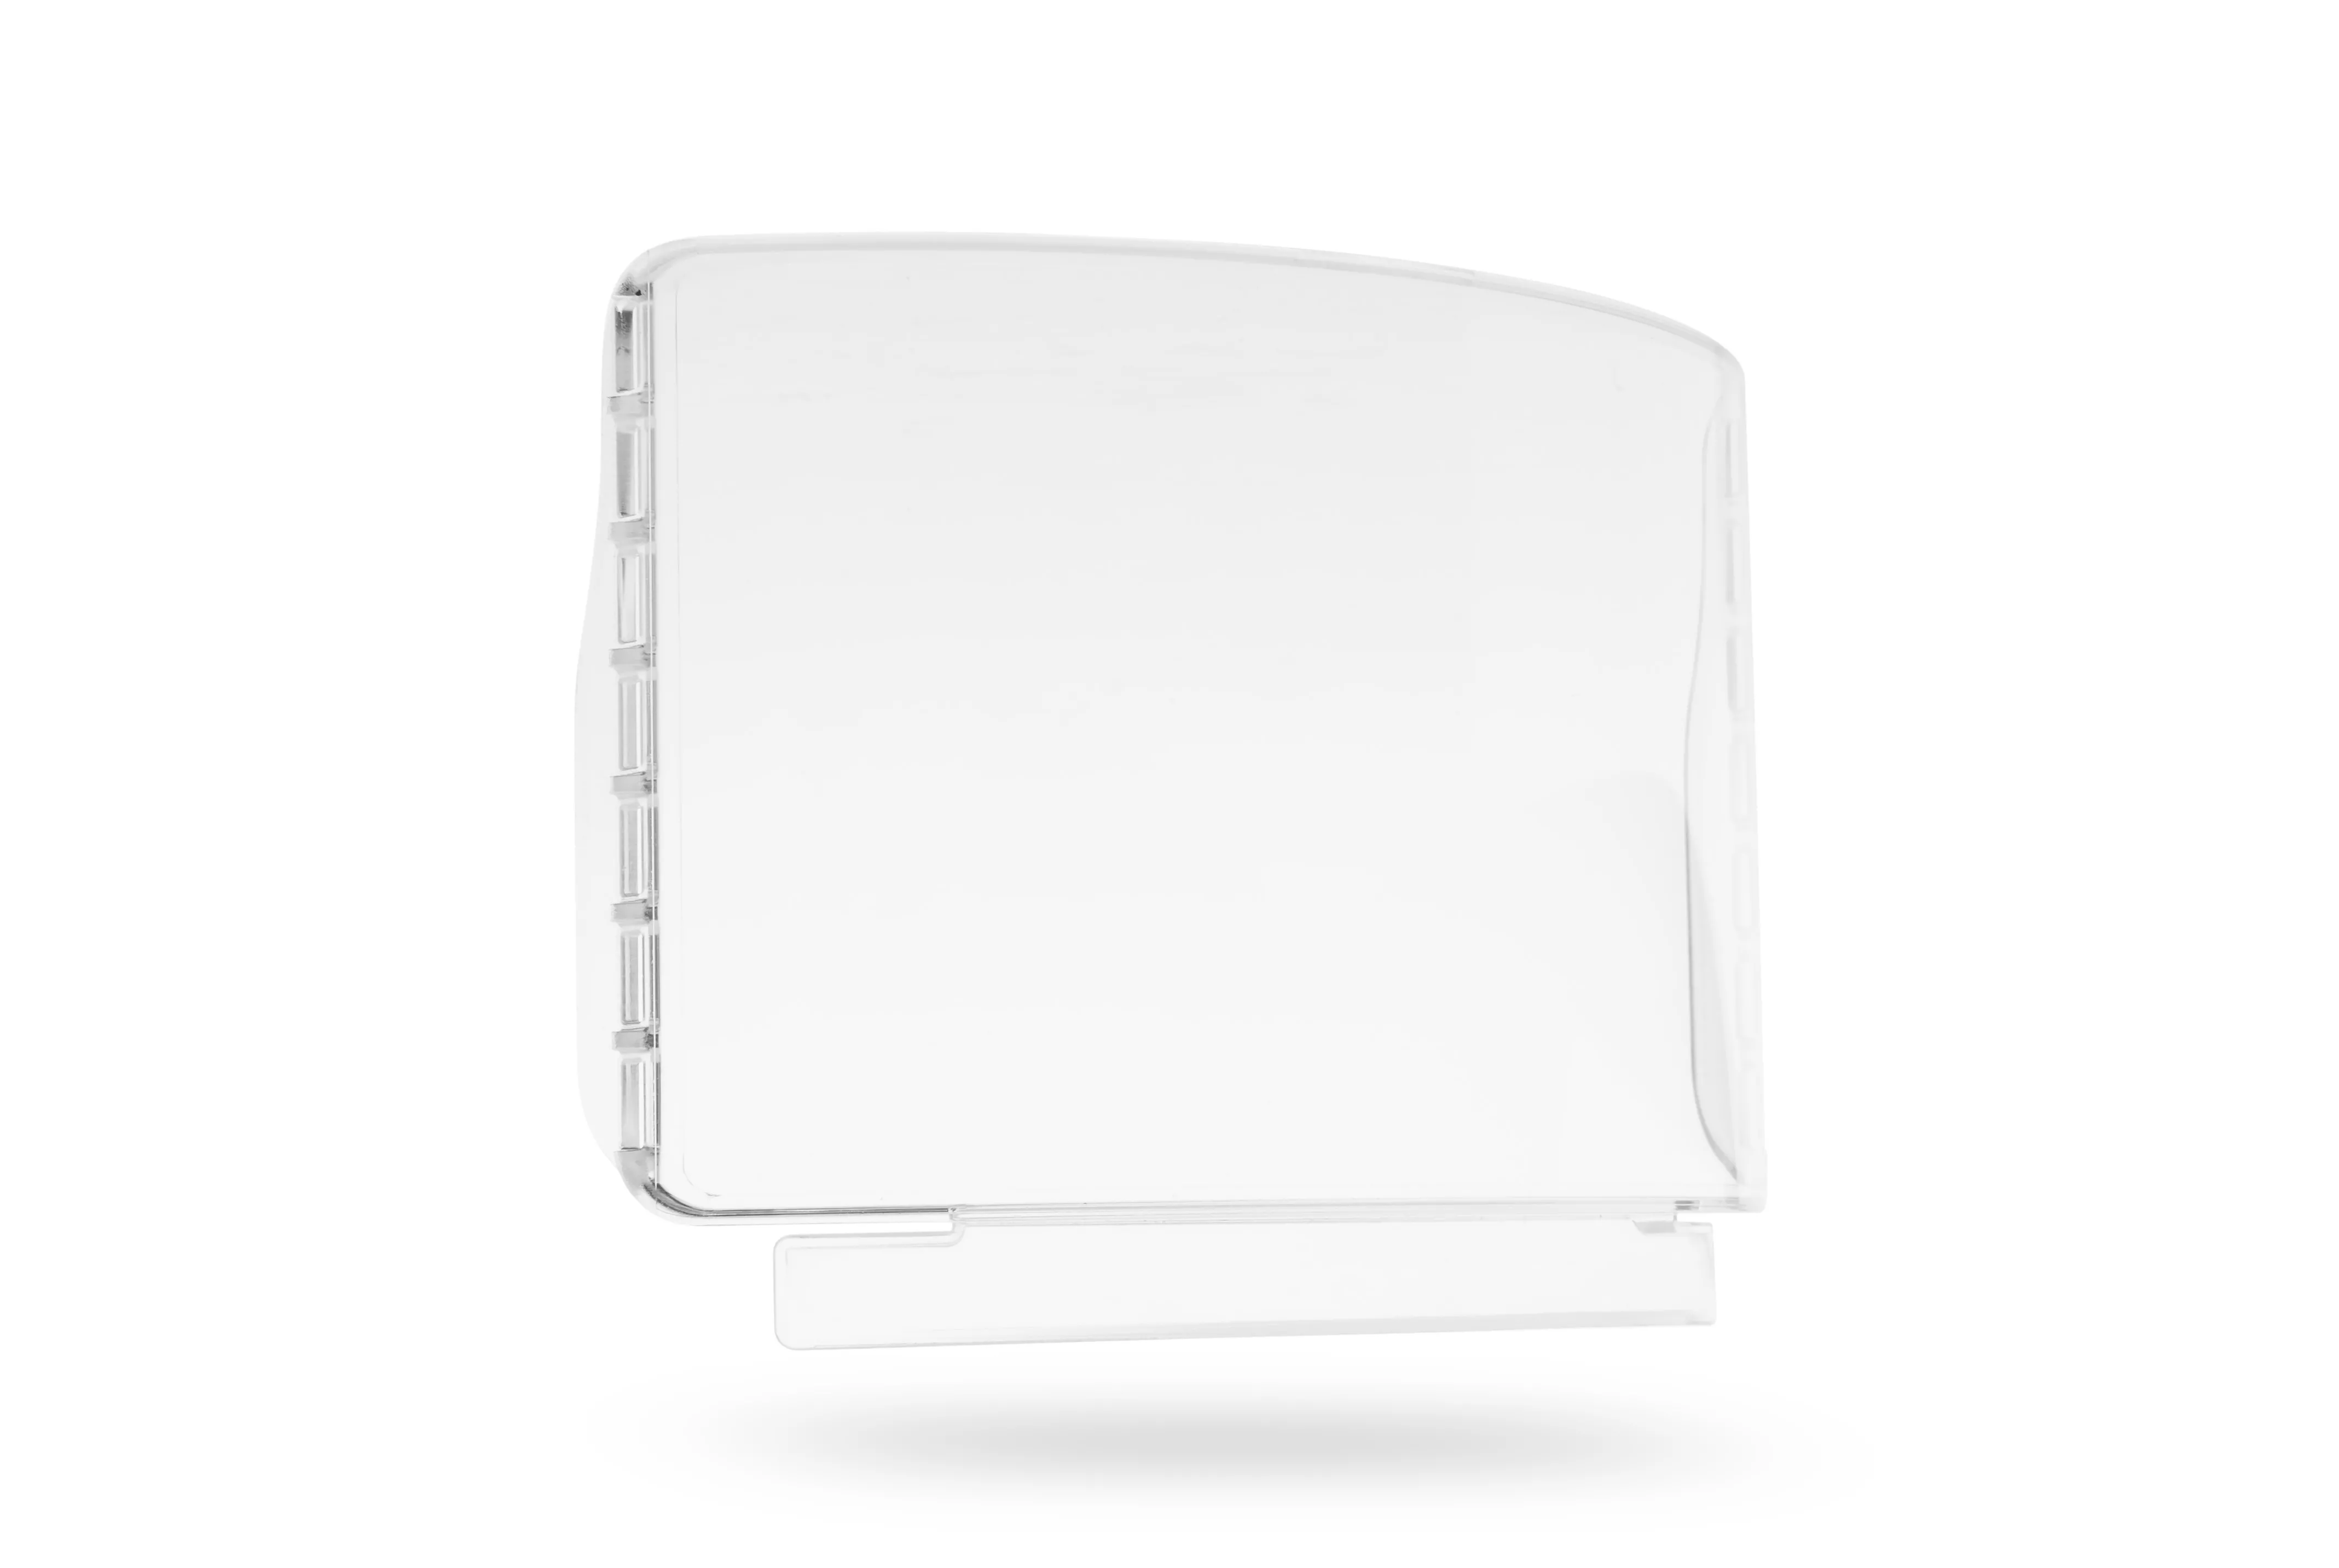 SKU 7100241573 | 3M™ Speedglas™ G5-02 Inside Protection Plate with Integrated Airflow Deflector 08-0200-50